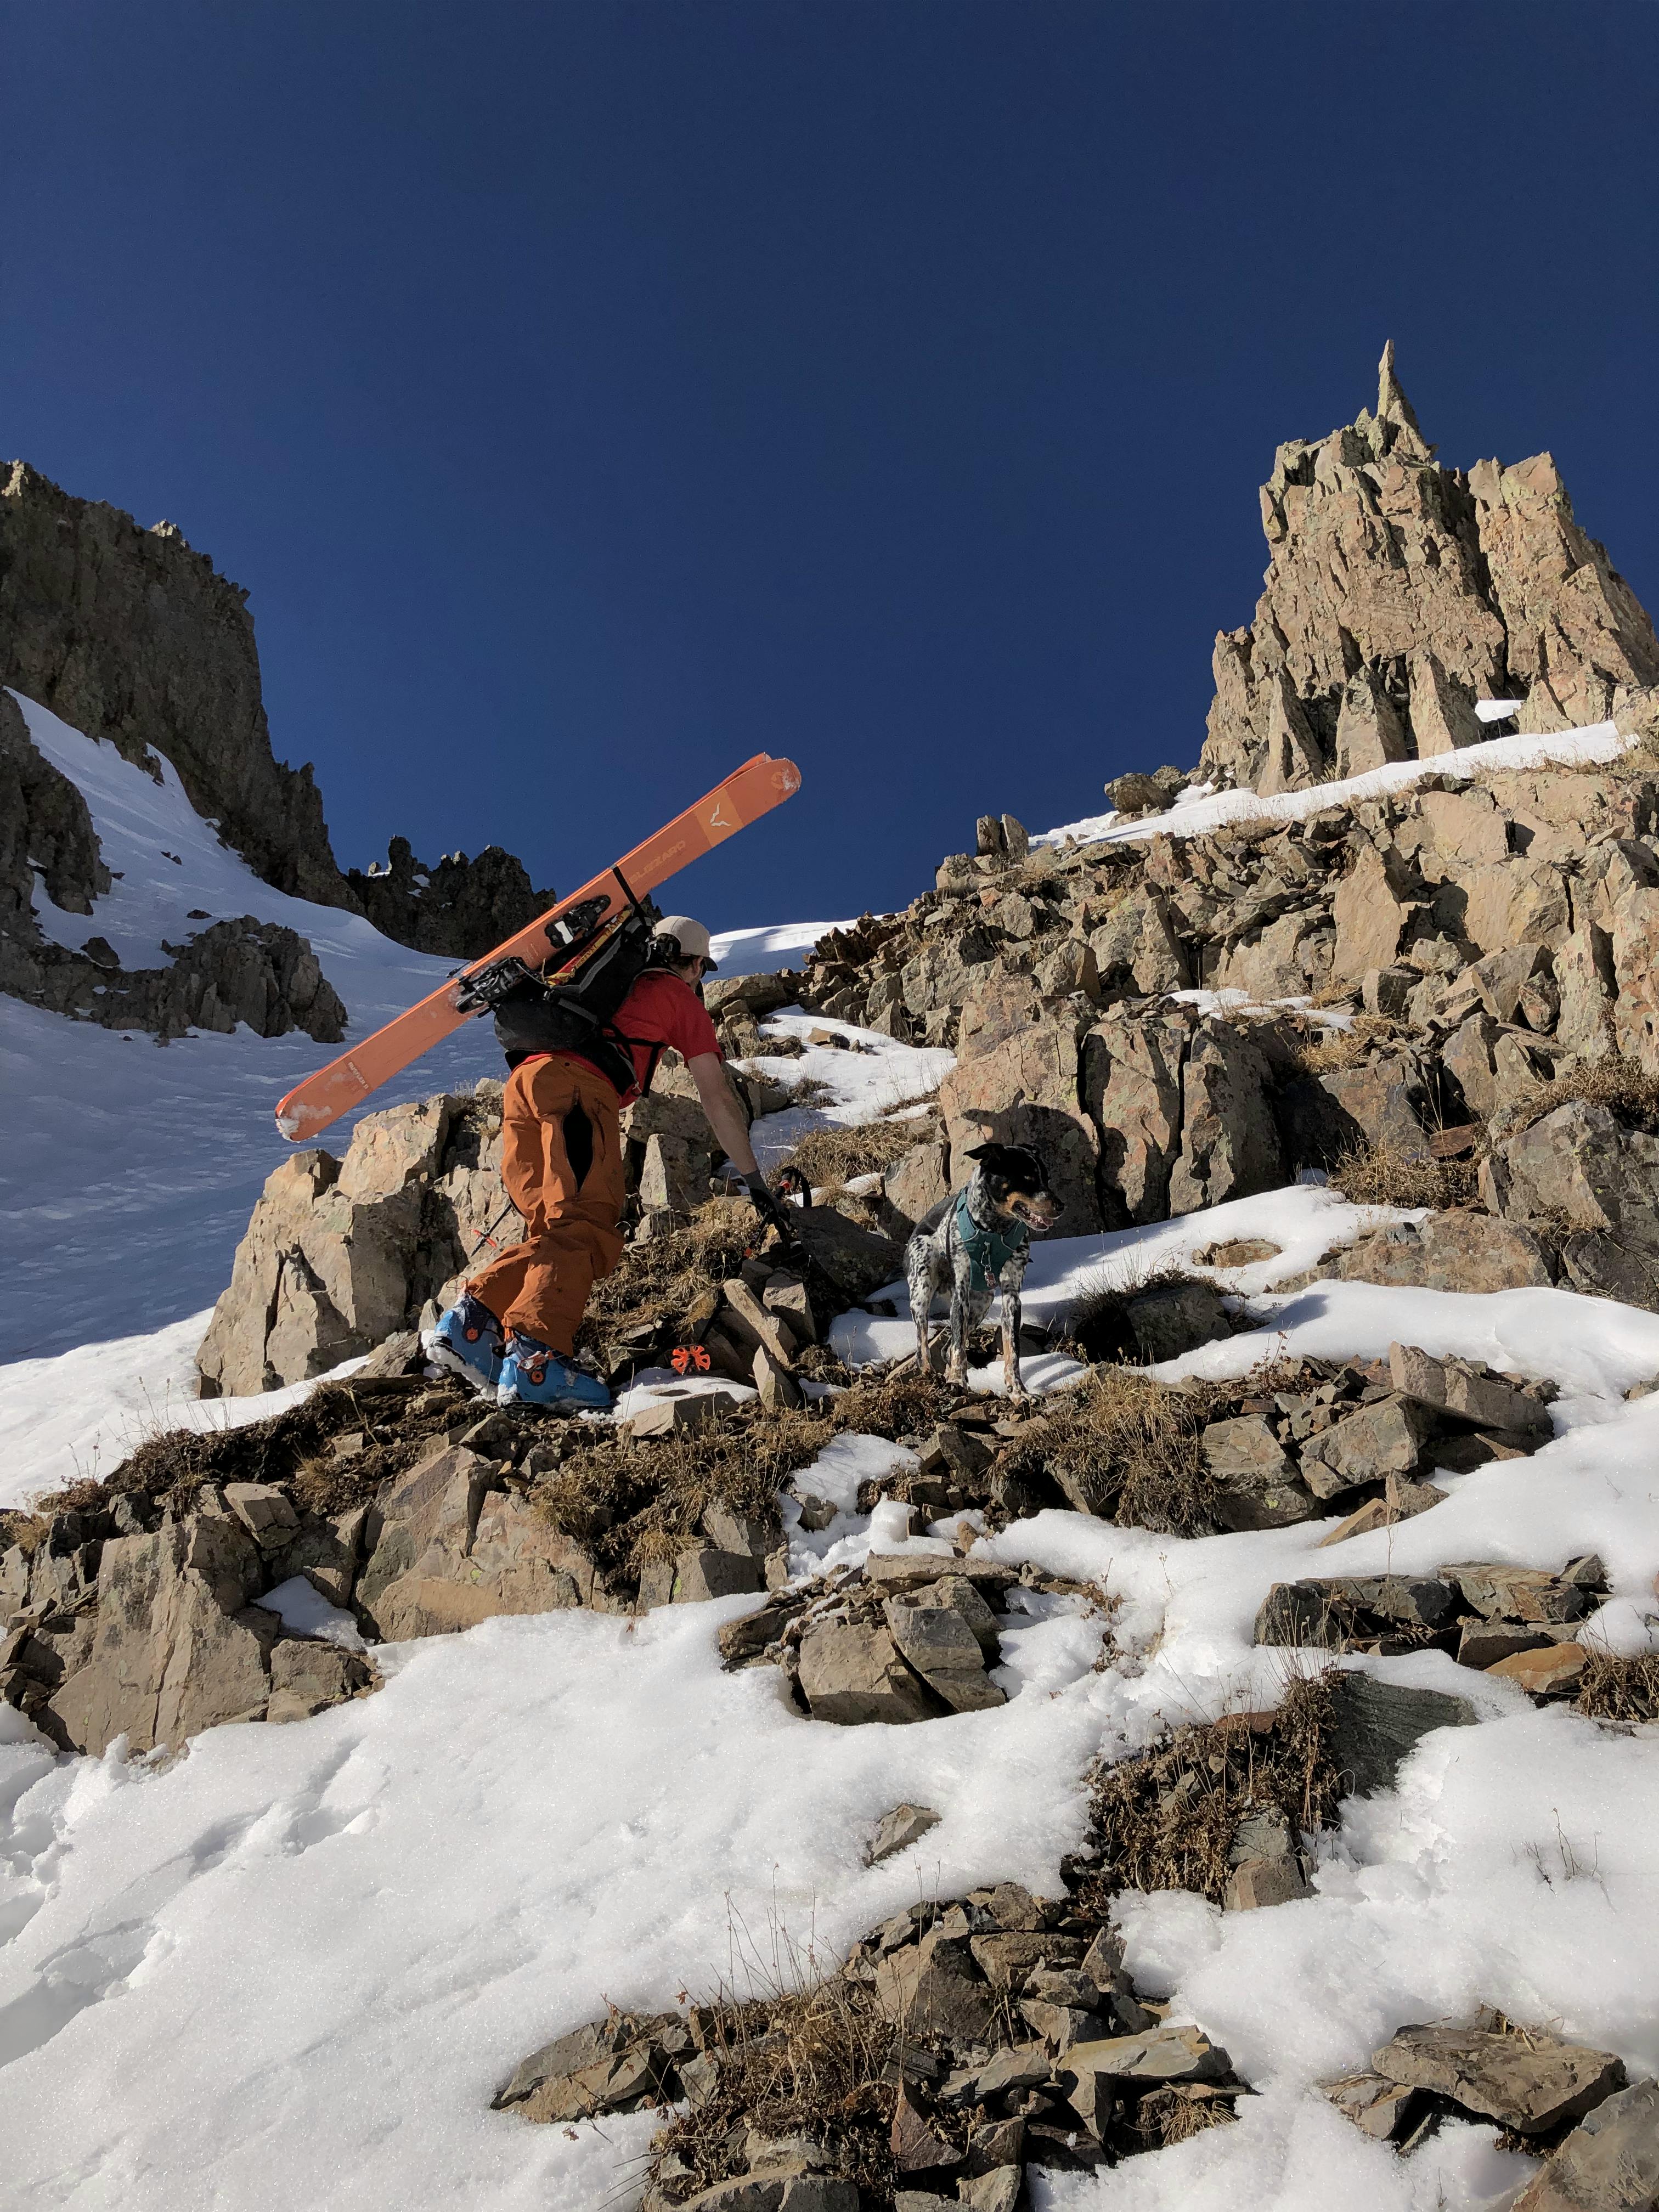 A skier climbing up a mountain with the Blizzard Rustler 11 Skis · 2022 skis on his back.